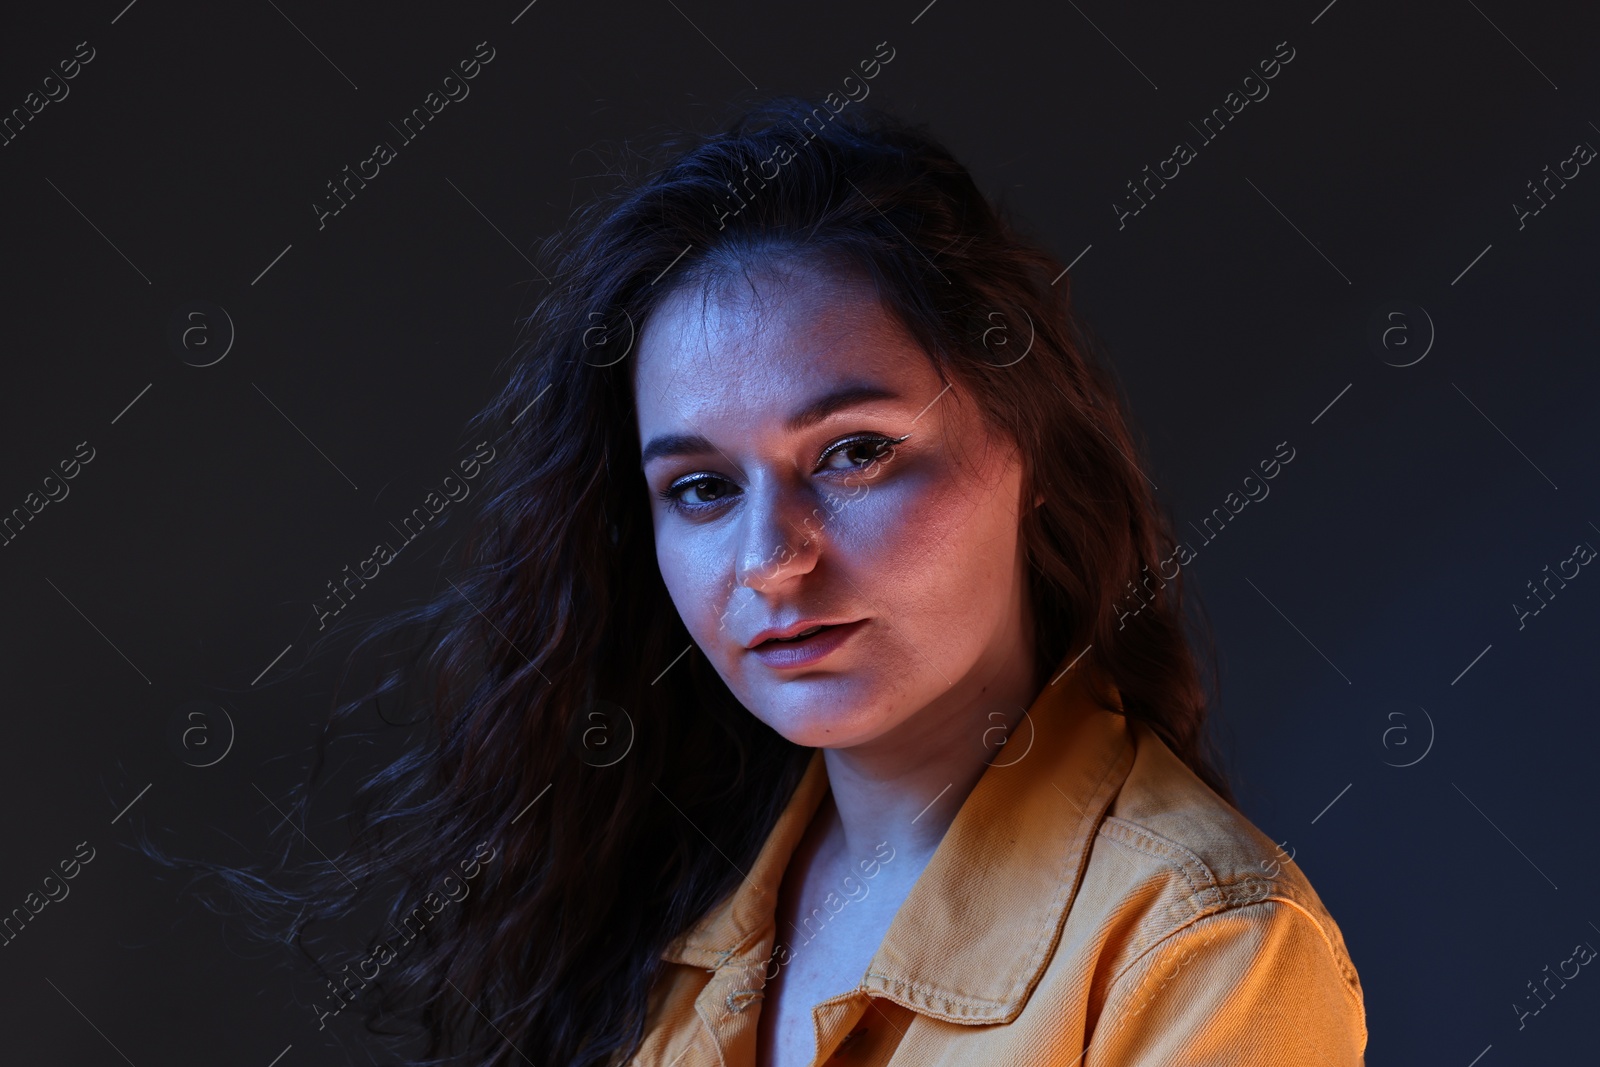 Photo of Portrait of beautiful young woman on color background with neon lights